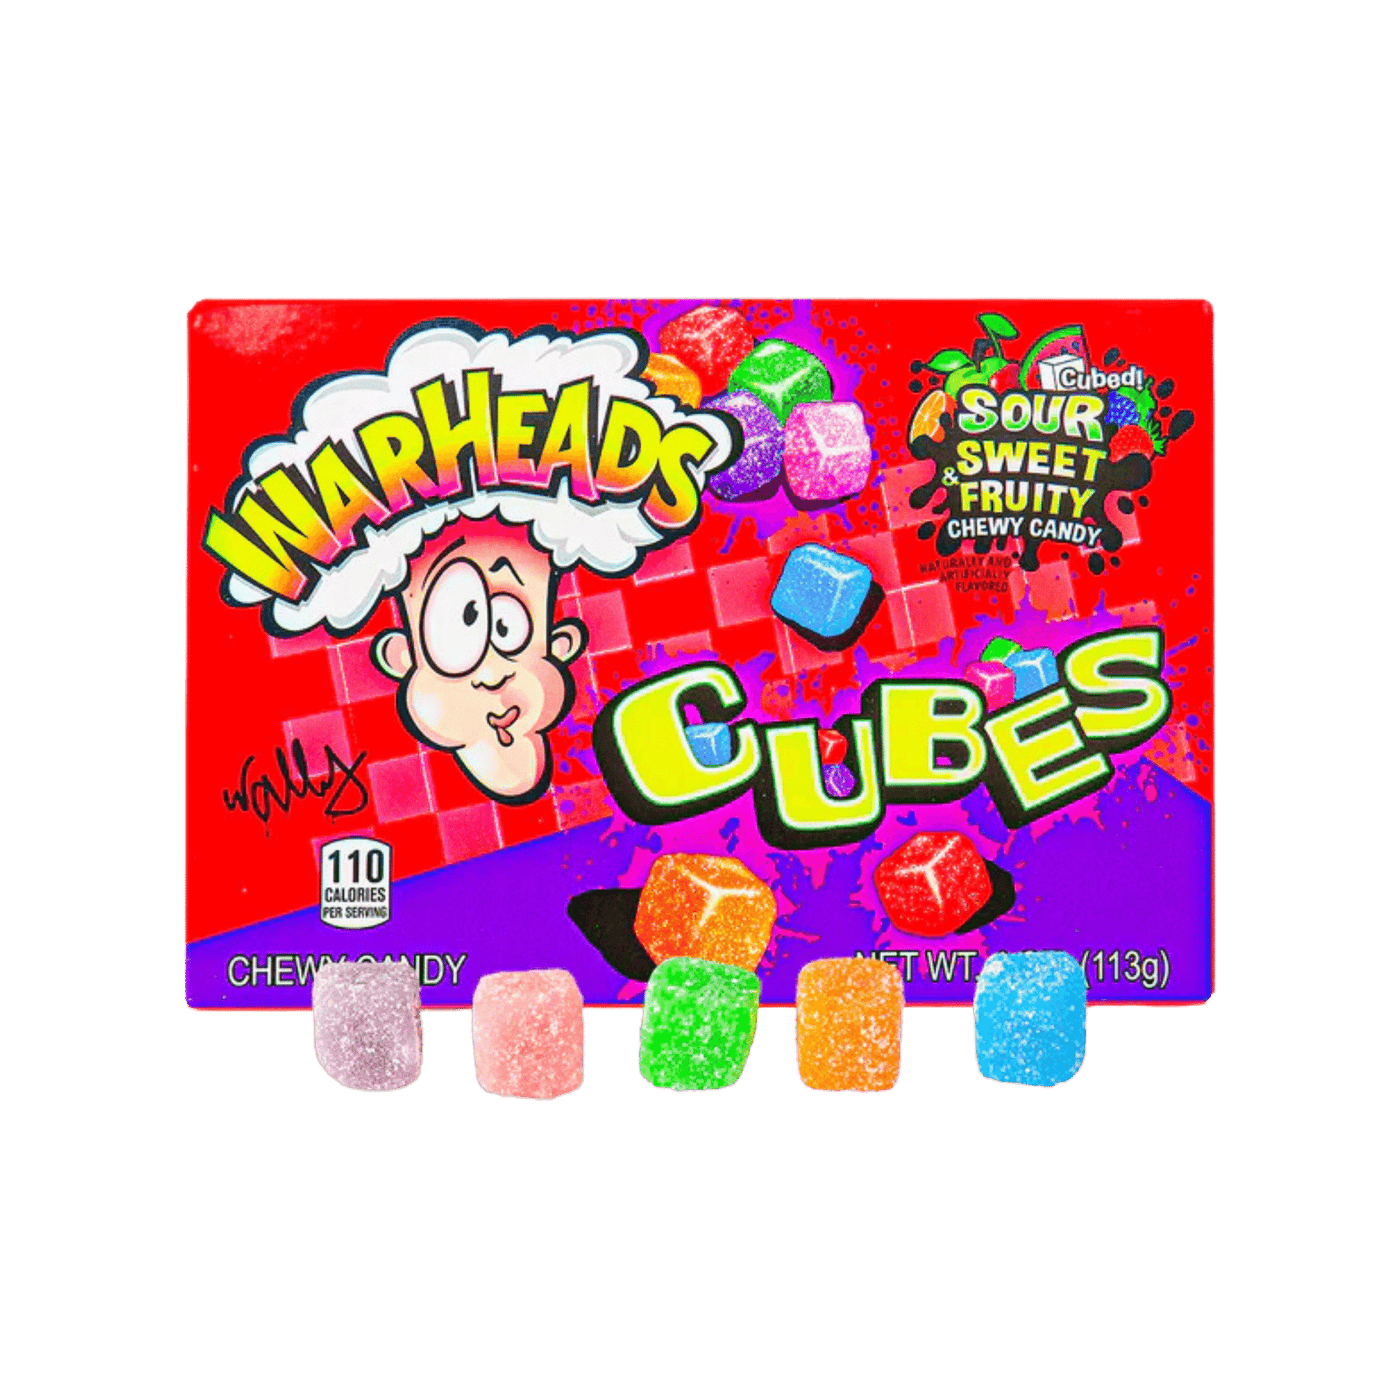 Warheads - Sour Cubes (Theater Box)